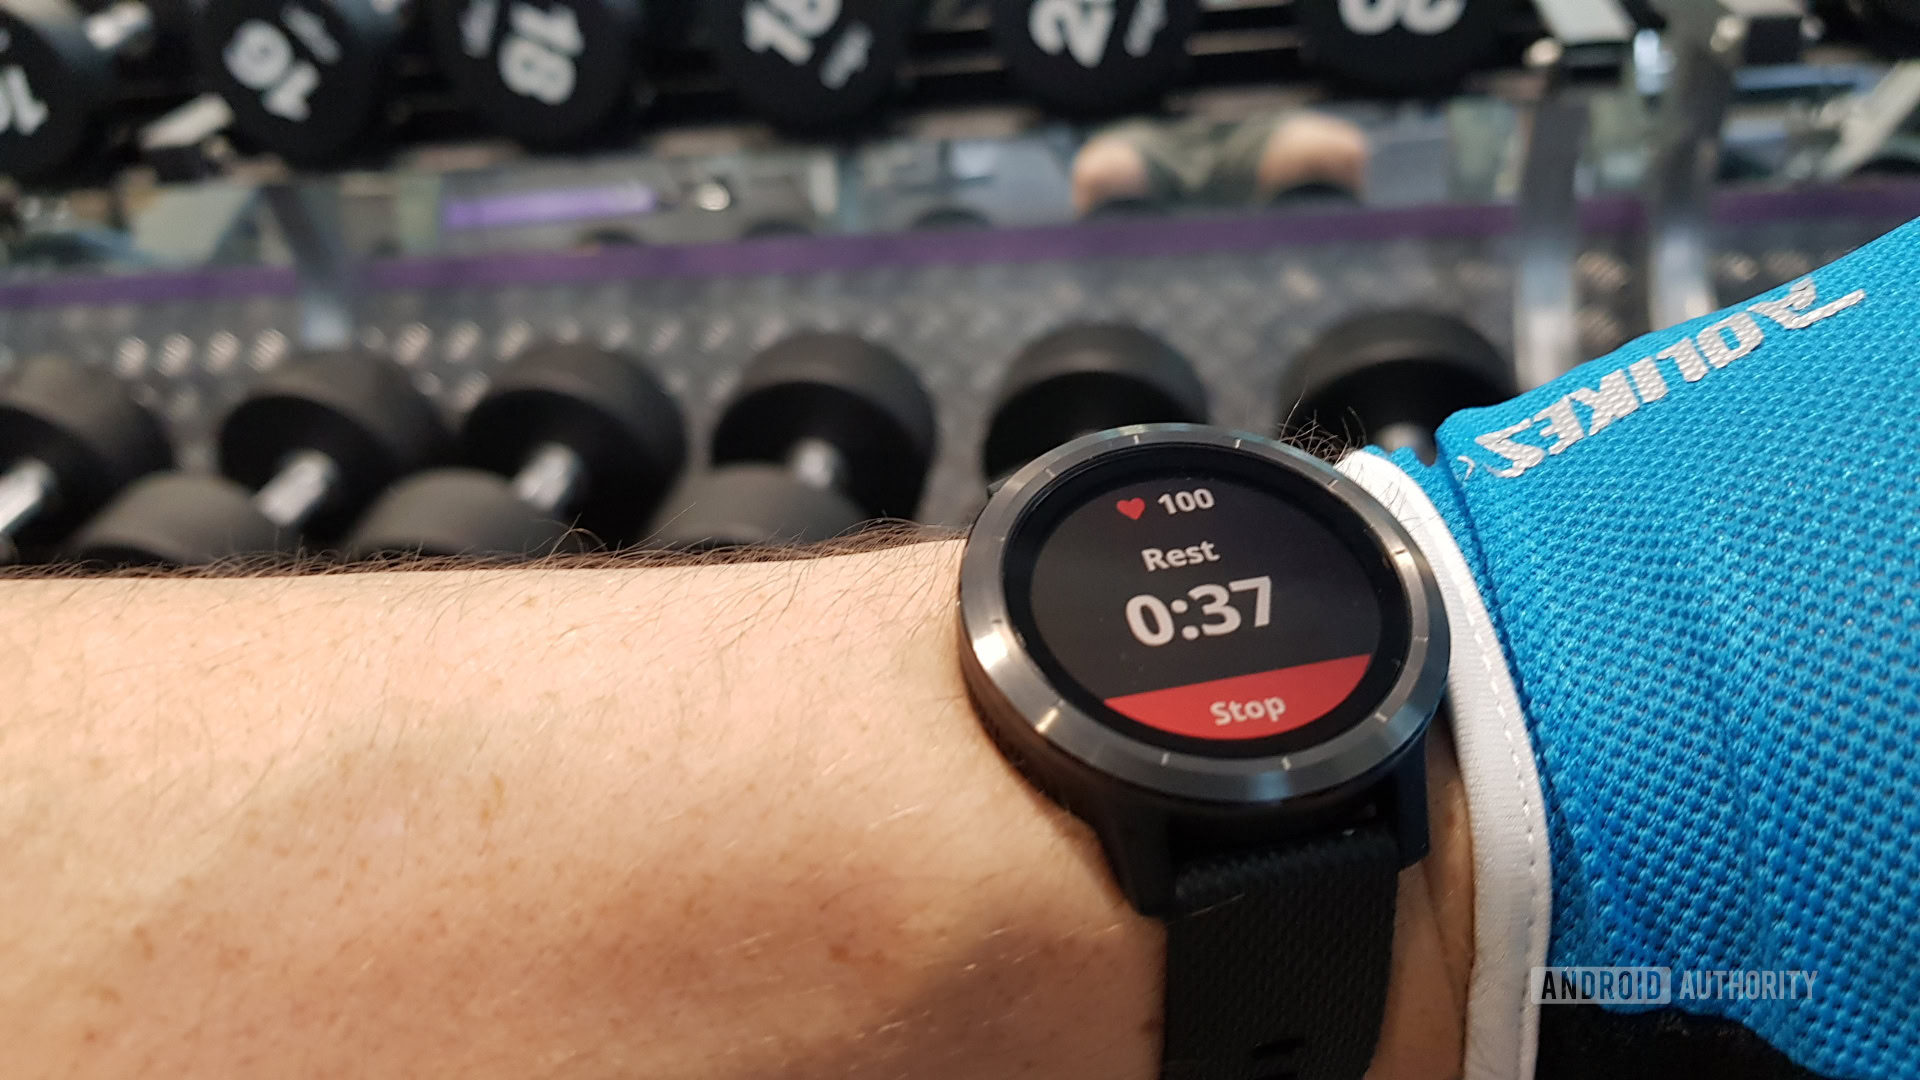 Garmin Vivoactive 3 Review: This Apple Watch Rival Wins on Fitness 